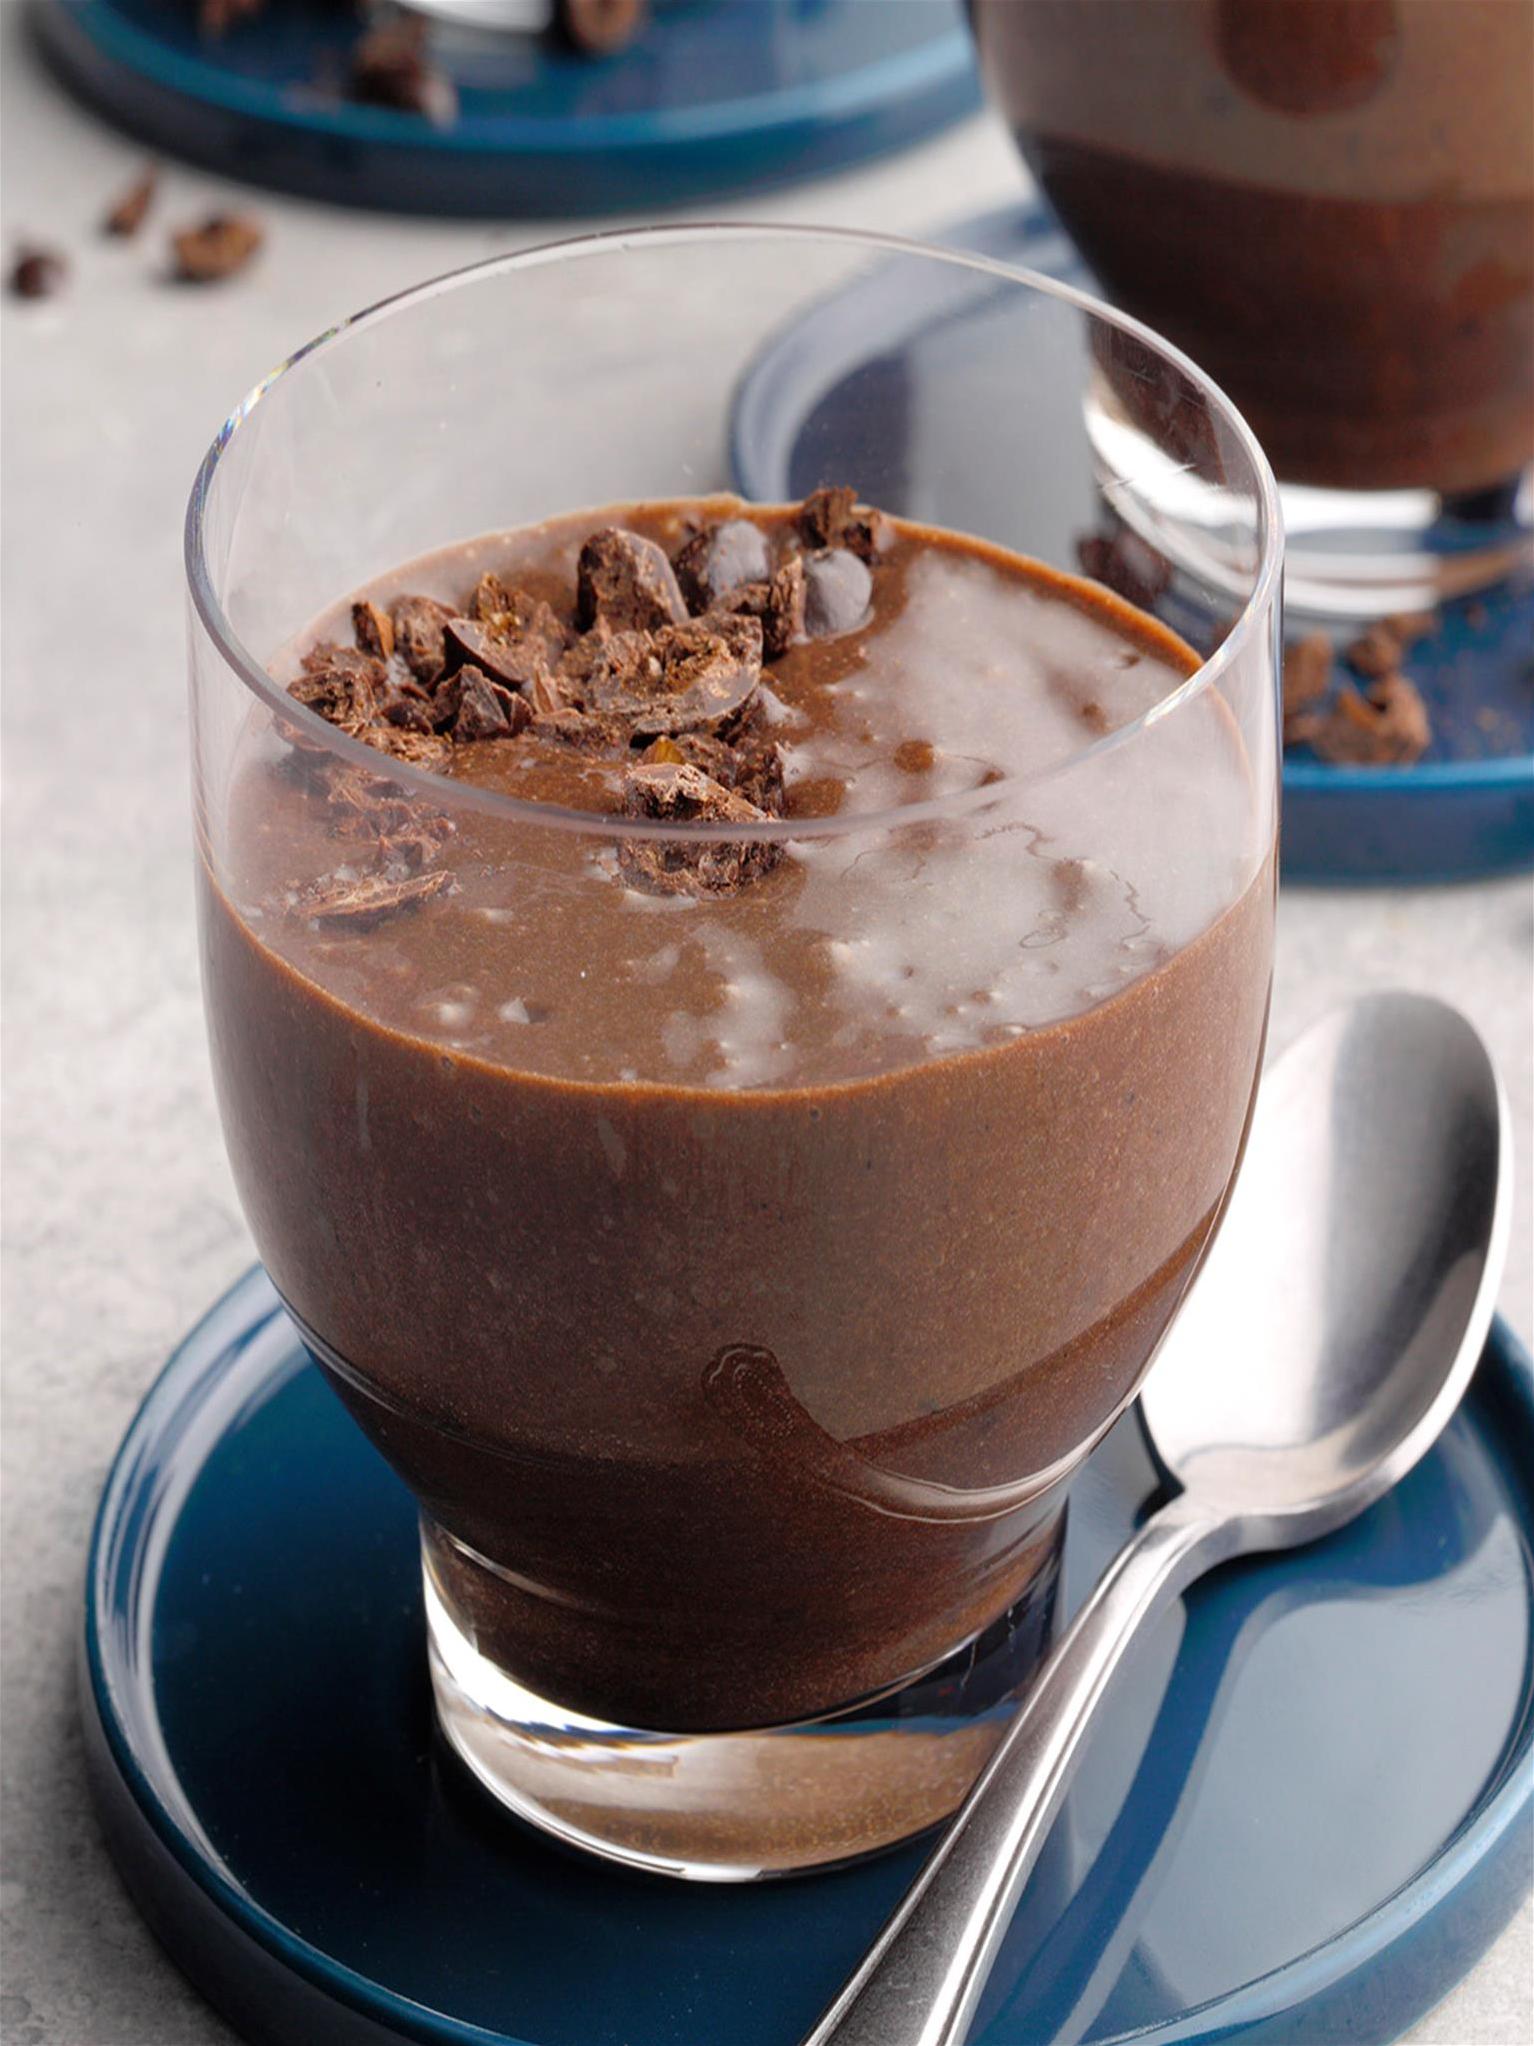  Say goodbye to boring desserts and hello to these indulgent chocolate espresso puddings.